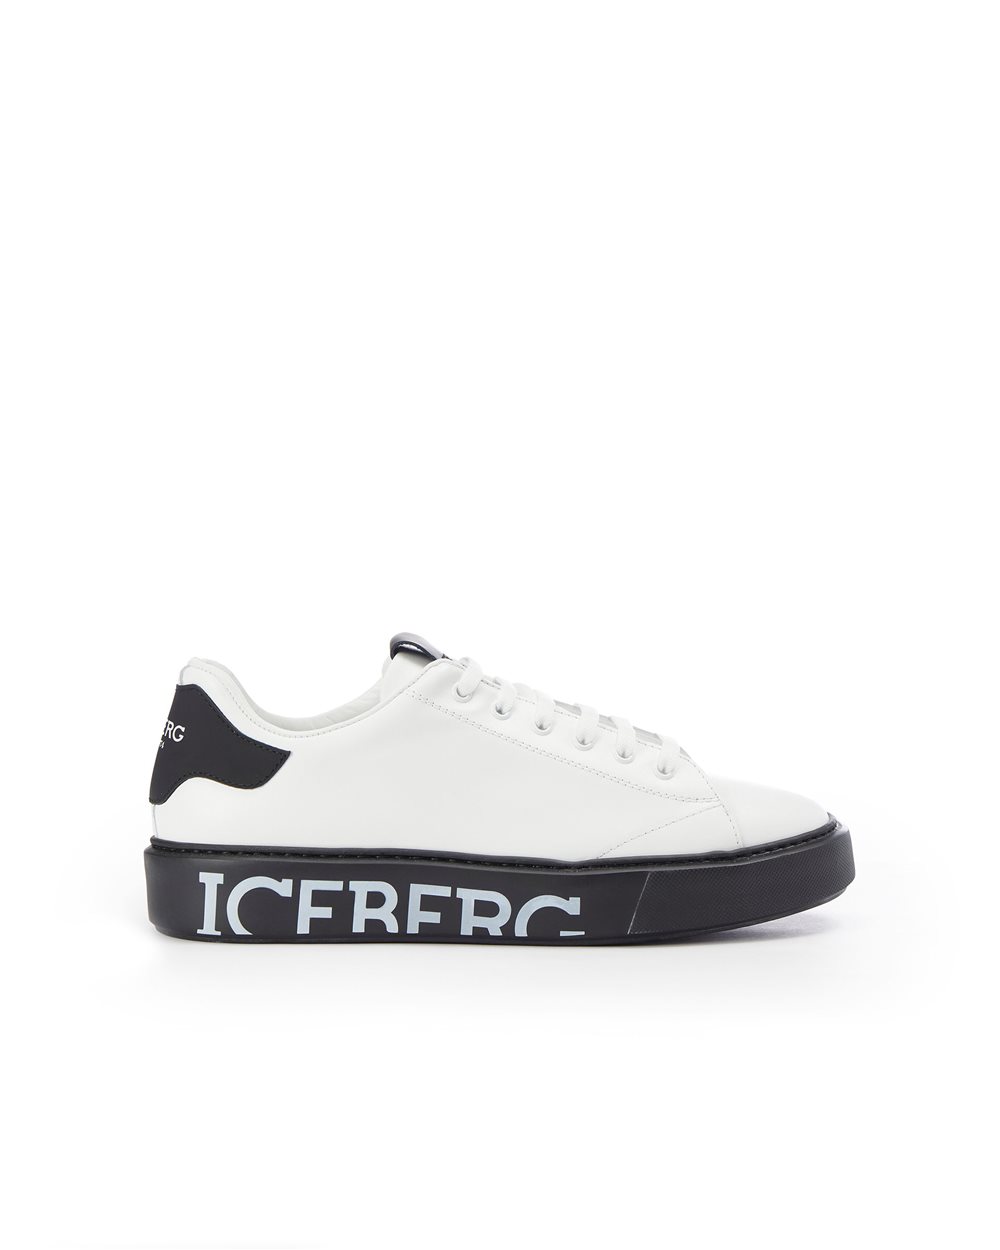 Leather Bozeman sneakers - ( PRIMO STEP IT ) PROMO SALDI UP TO 30% | Iceberg - Official Website